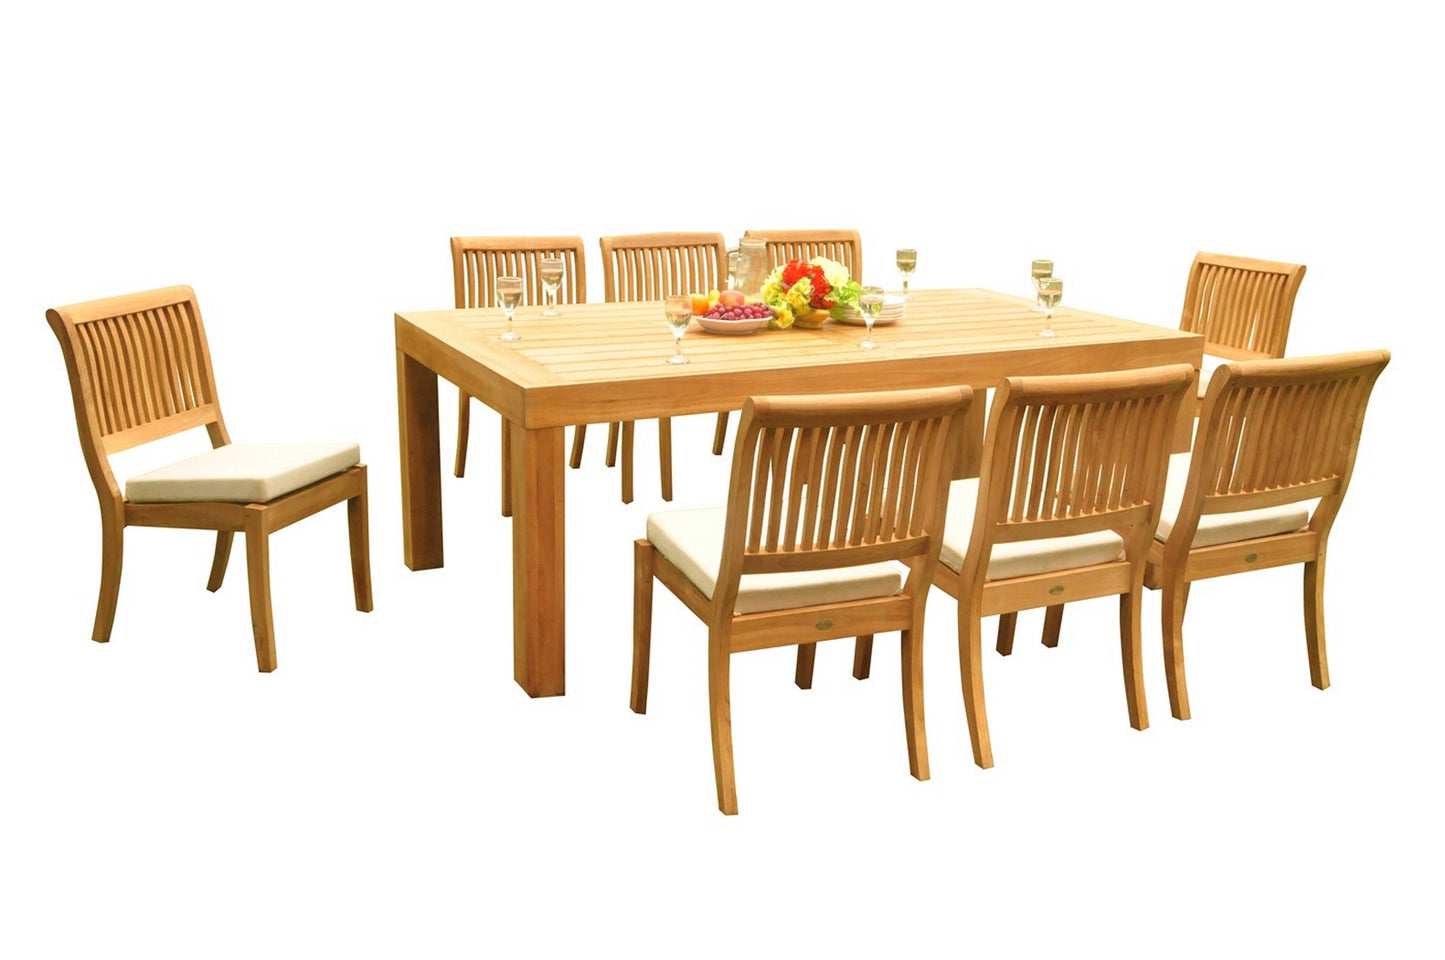 86" Canberra Table with Arbor Armless Chairs